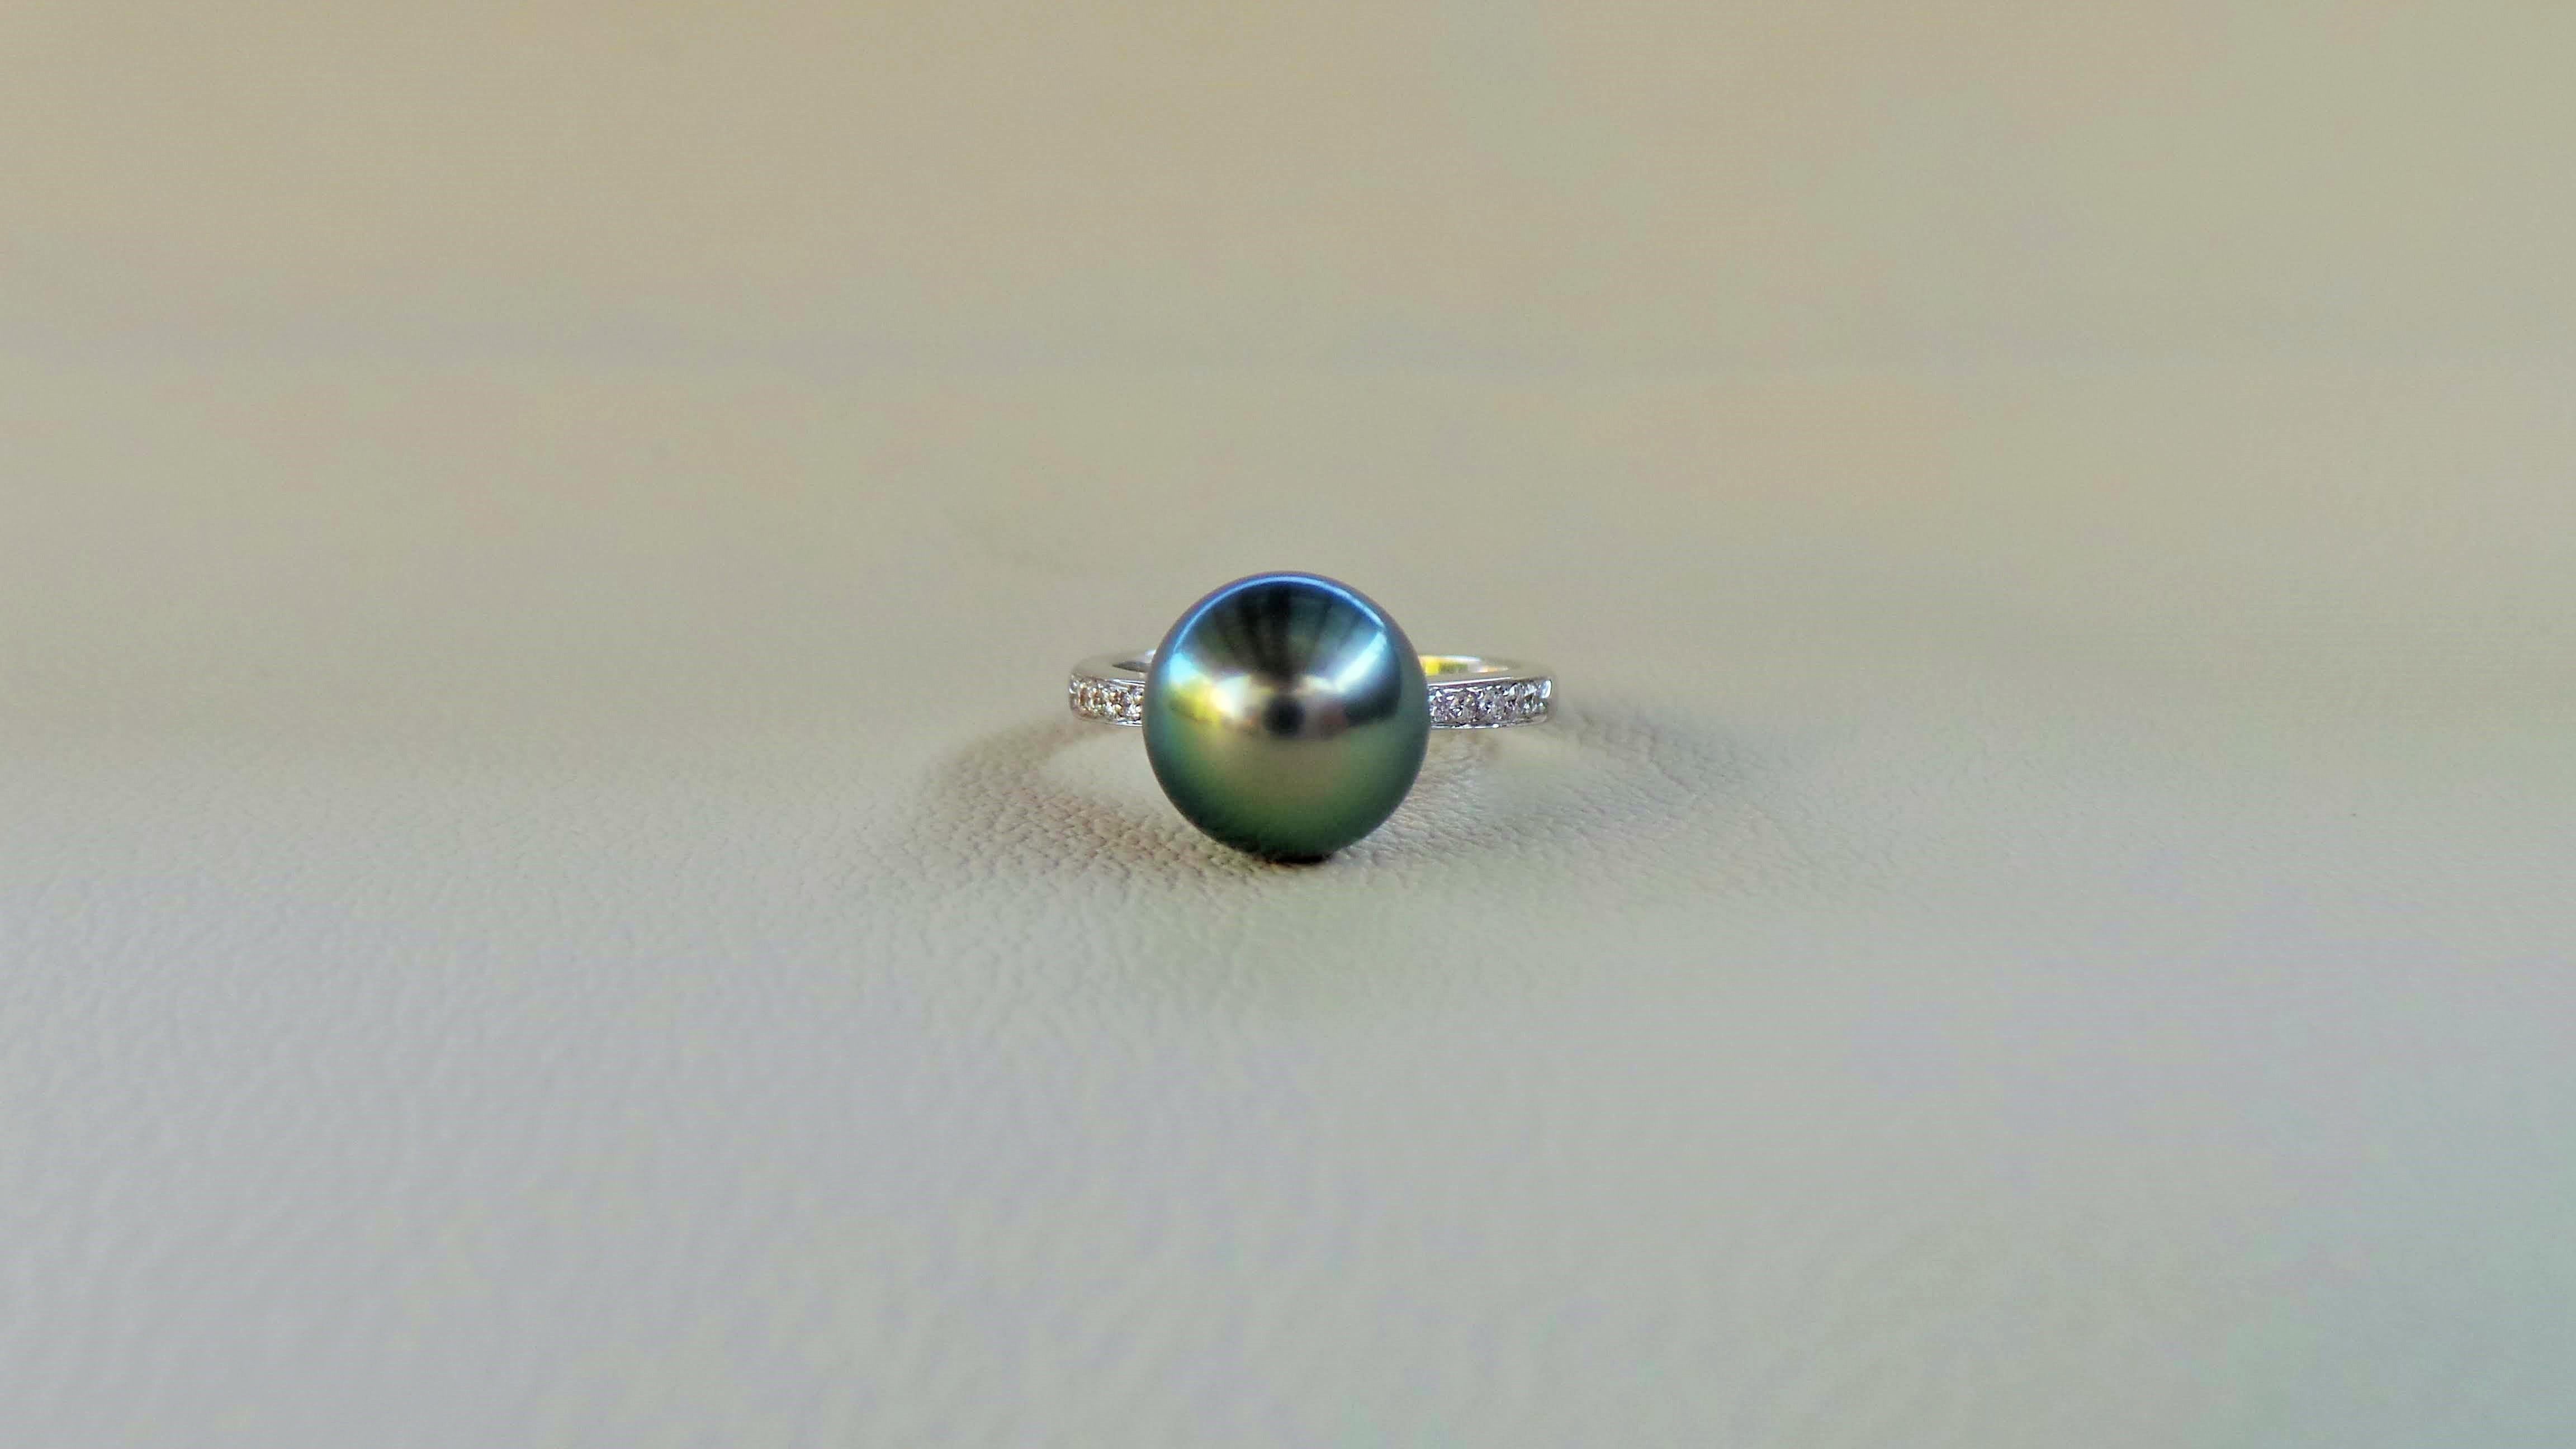 Andrea Macinai design a dedicated collection for cocktail rings  with a perl and diamonds.
An 11 mm Tahitian black pearl is followed by 10 white diamonds brilliant-cut 0.15 carats in white gold. 
The ring was designed and made following the natural